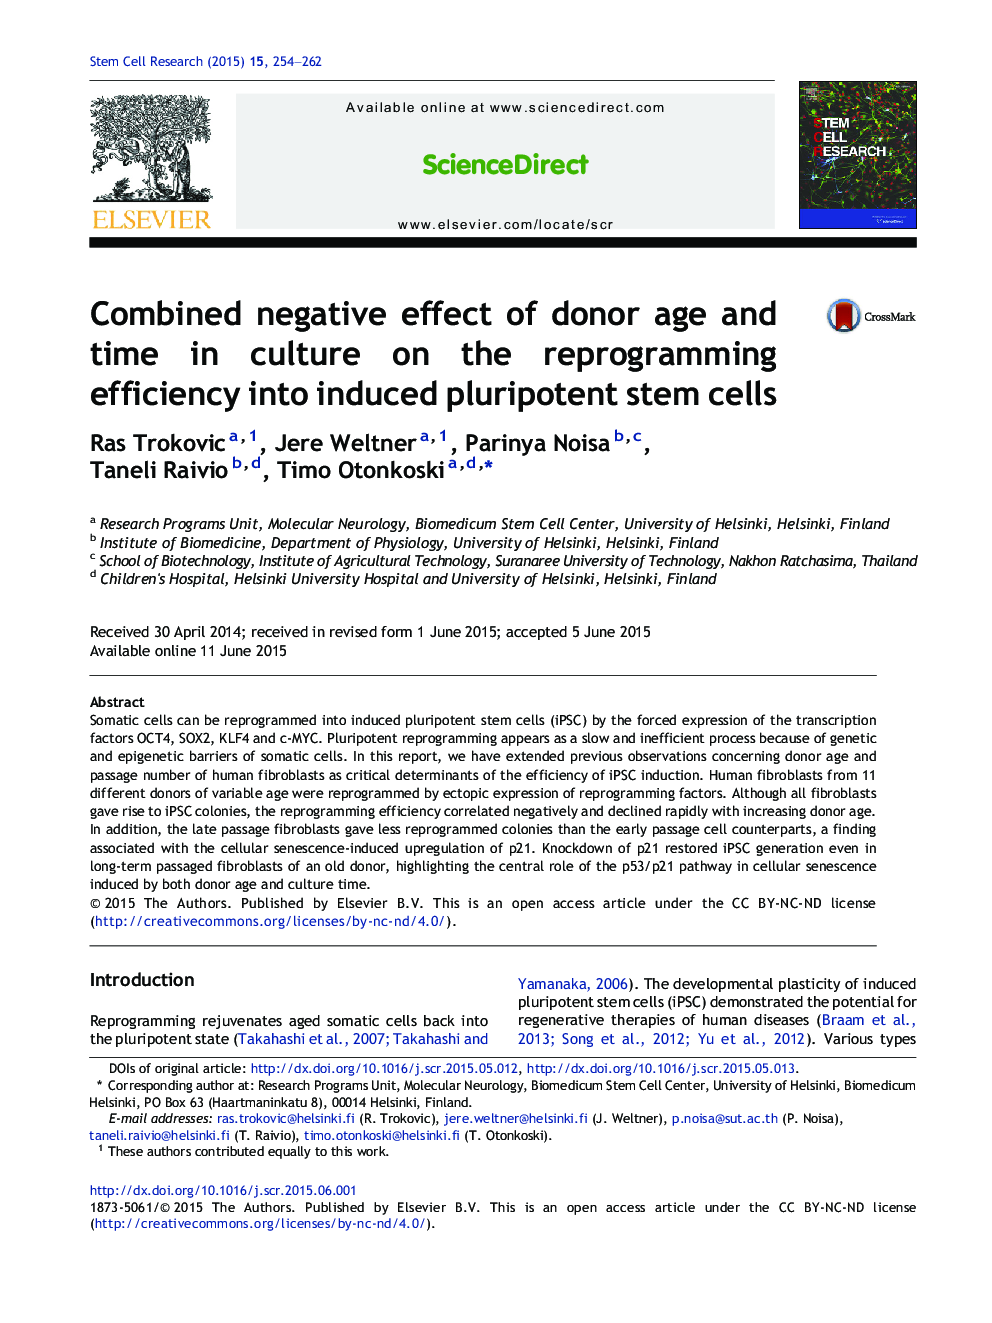 Combined negative effect of donor age and time in culture on the reprogramming efficiency into induced pluripotent stem cells